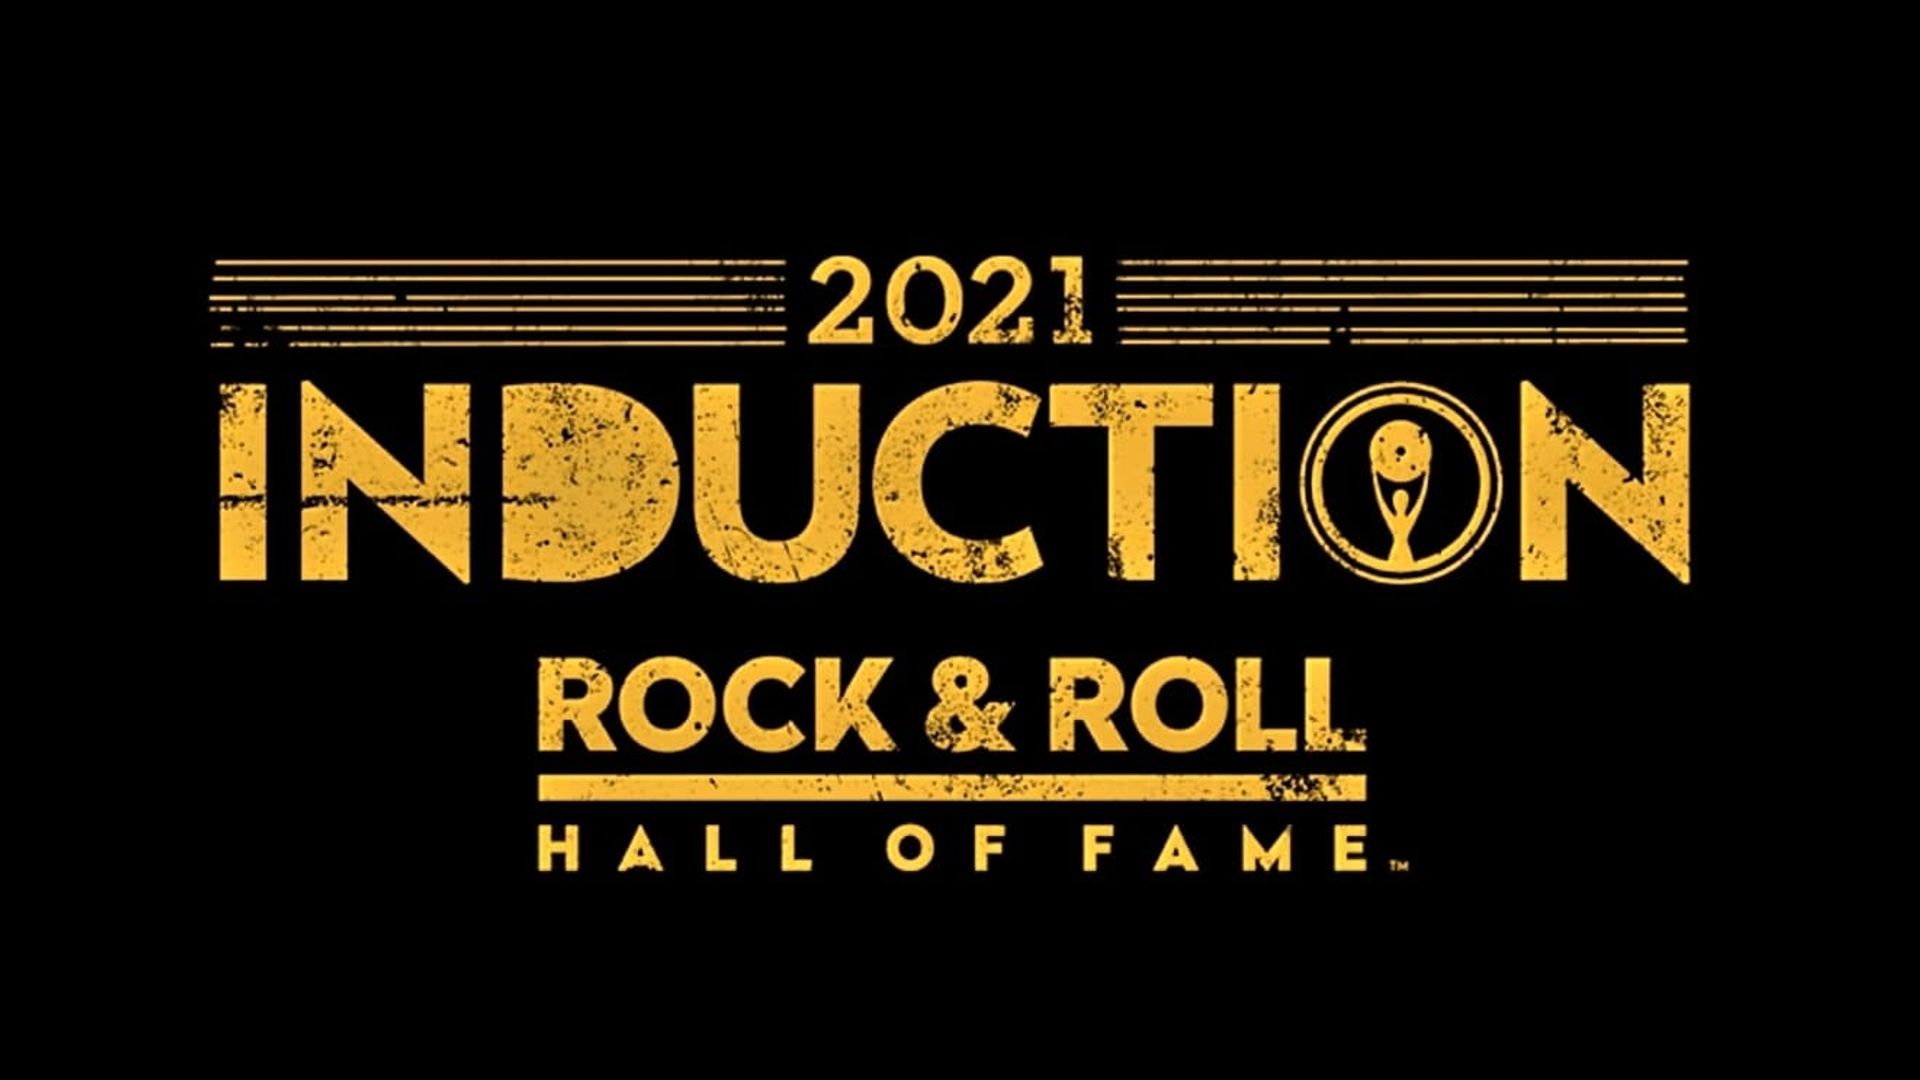 The 2021 Rock & Roll Hall of Fame Induction Ceremony background